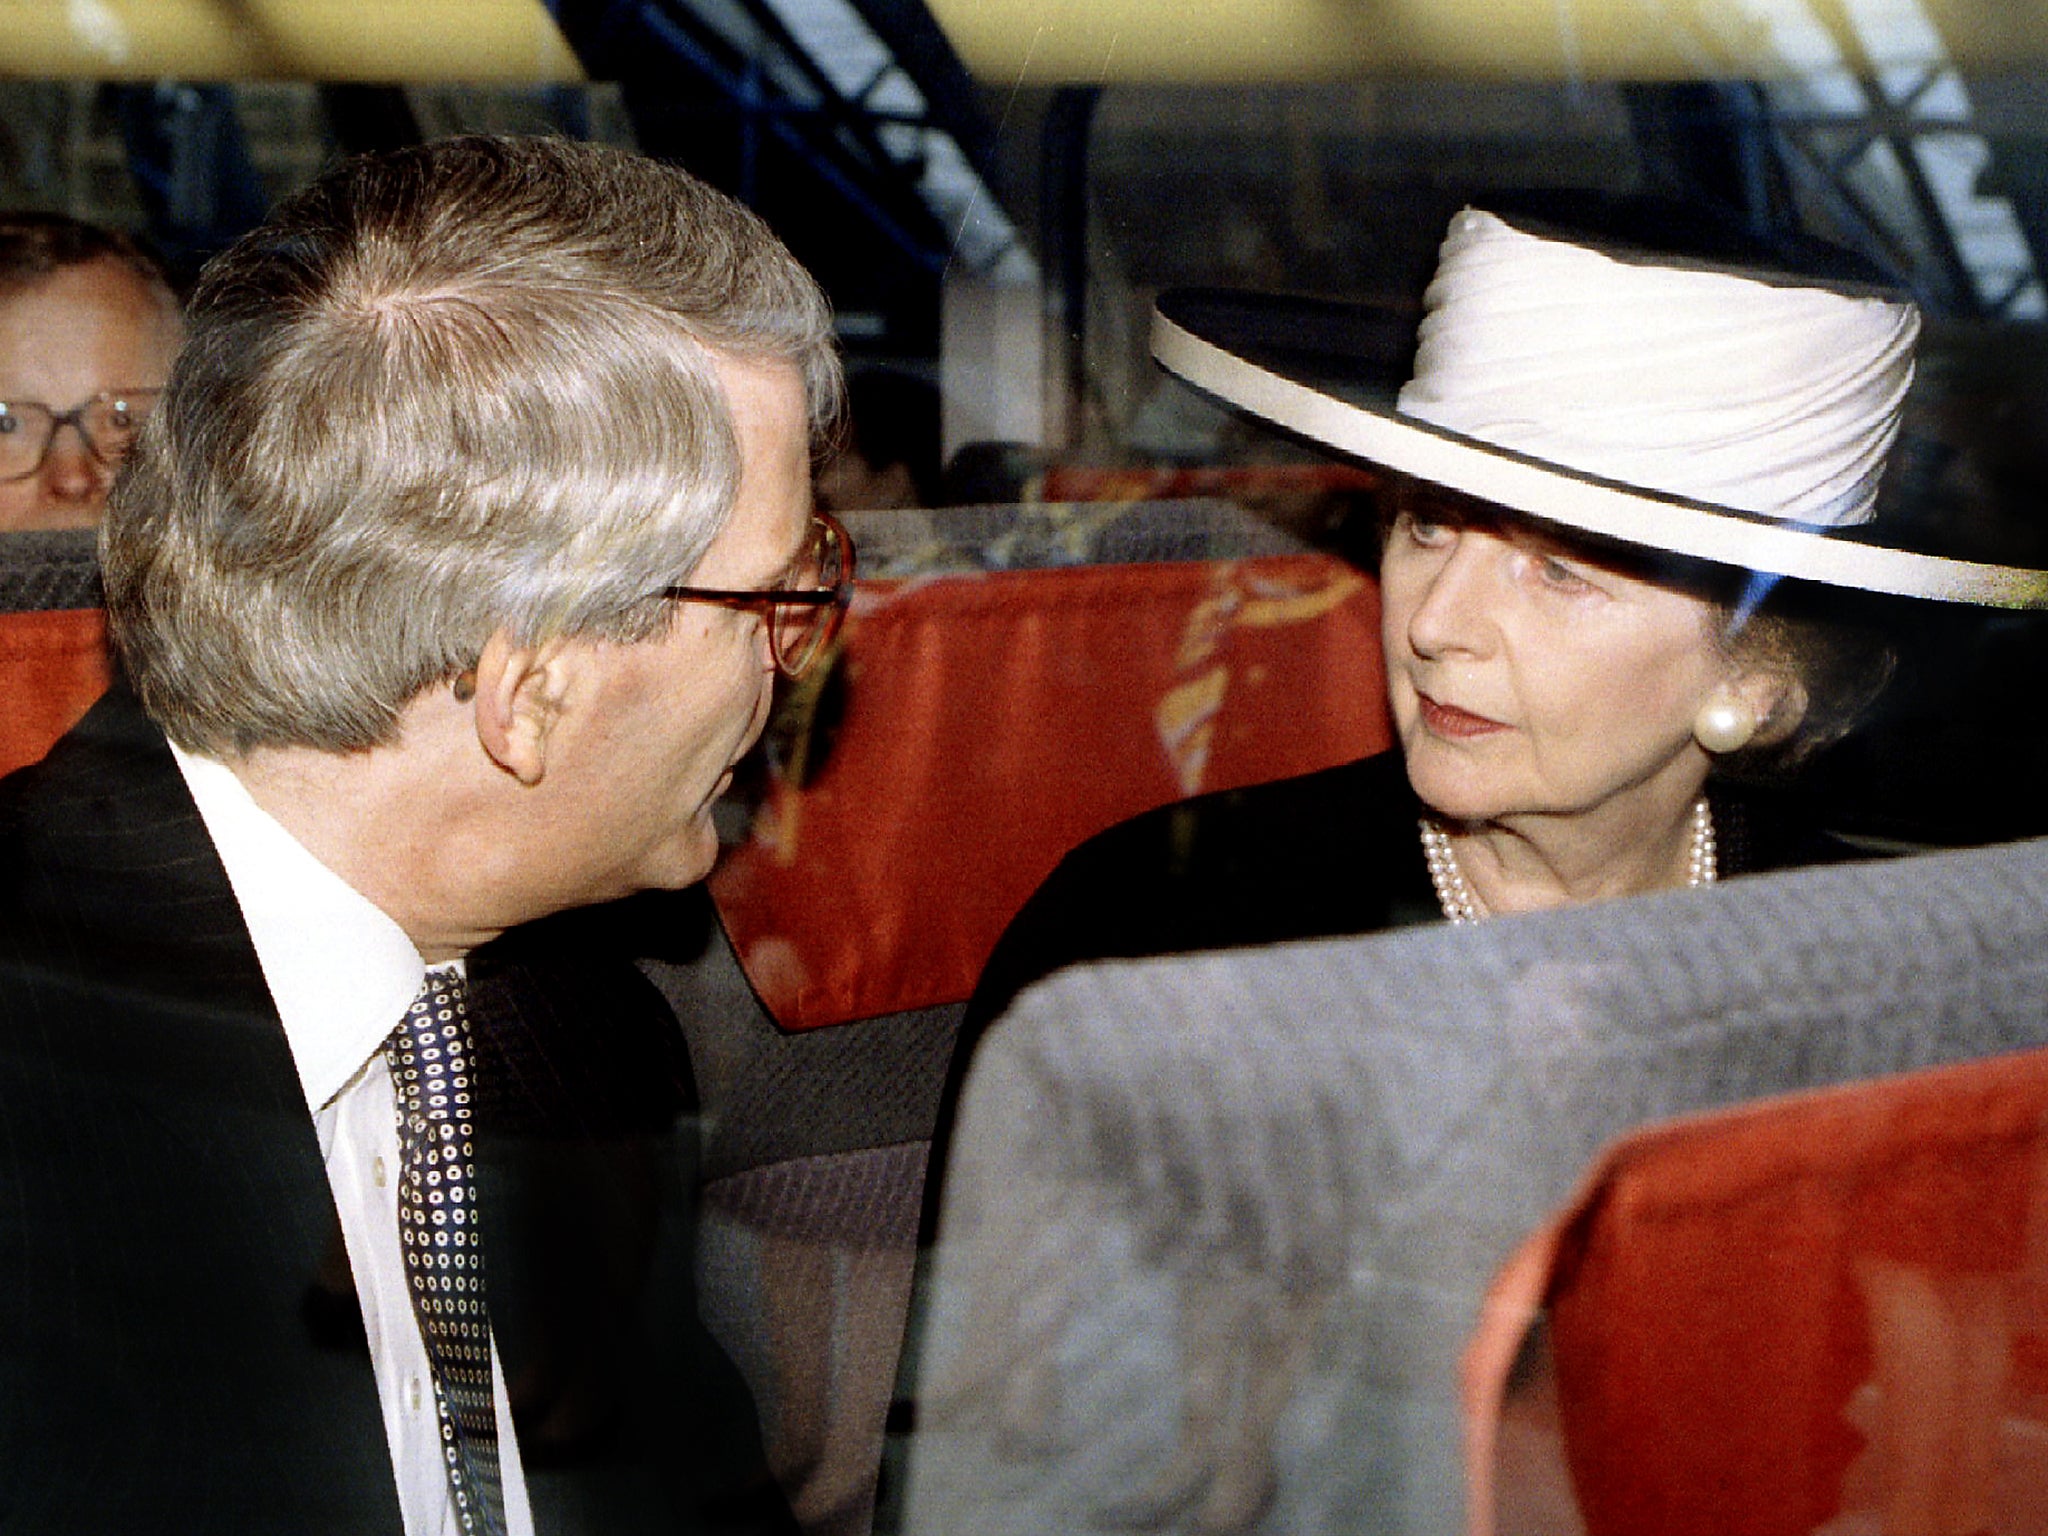 John Major and Margaret Thatcher on the inaugural Eurostar crossing in 1994, when the tunnel opened after 200 years of objections and fears had been overcome